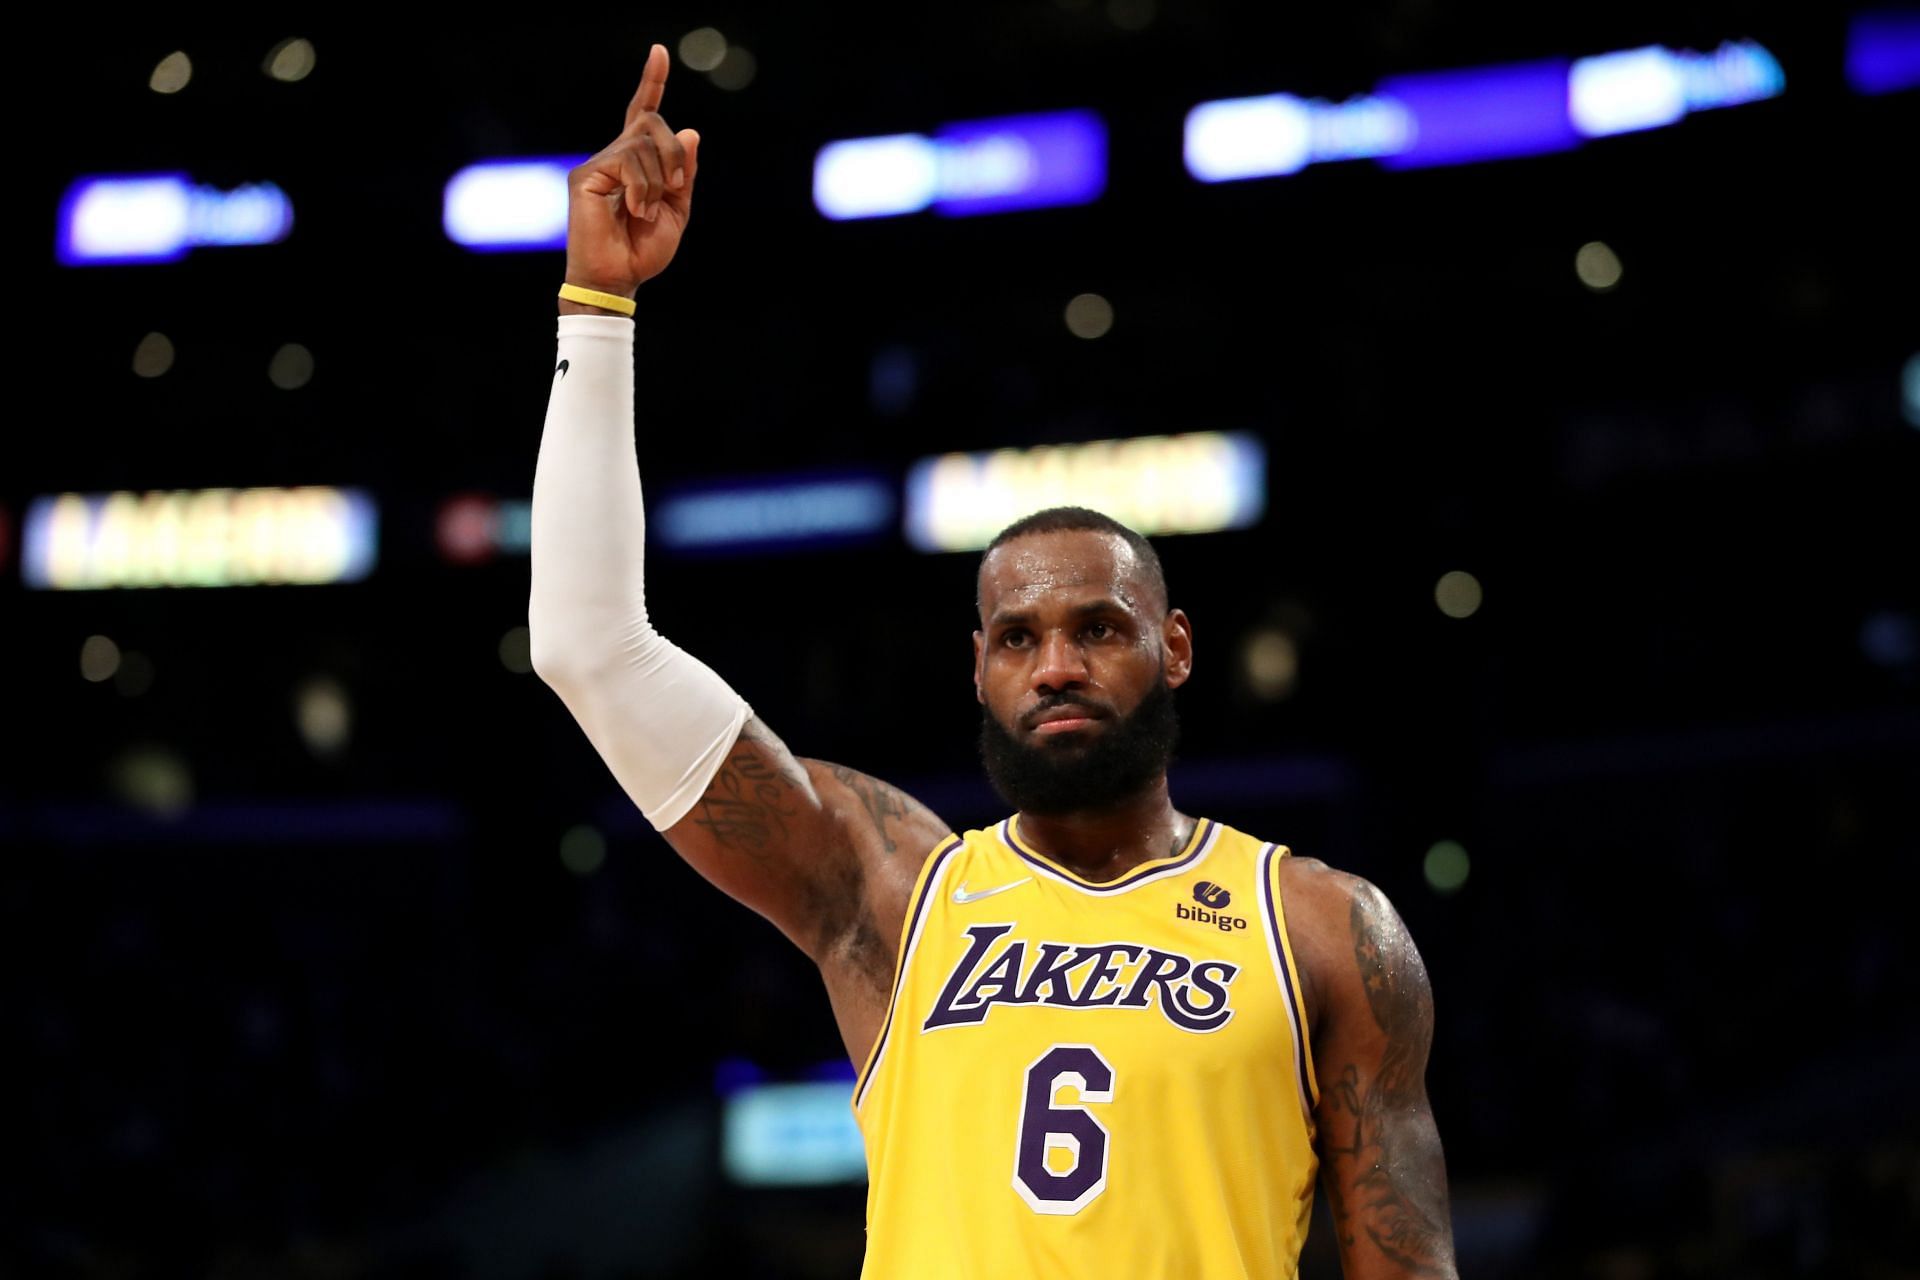 LA Lakers superstar LeBron James is gearing up to face his former team Miami Heat.